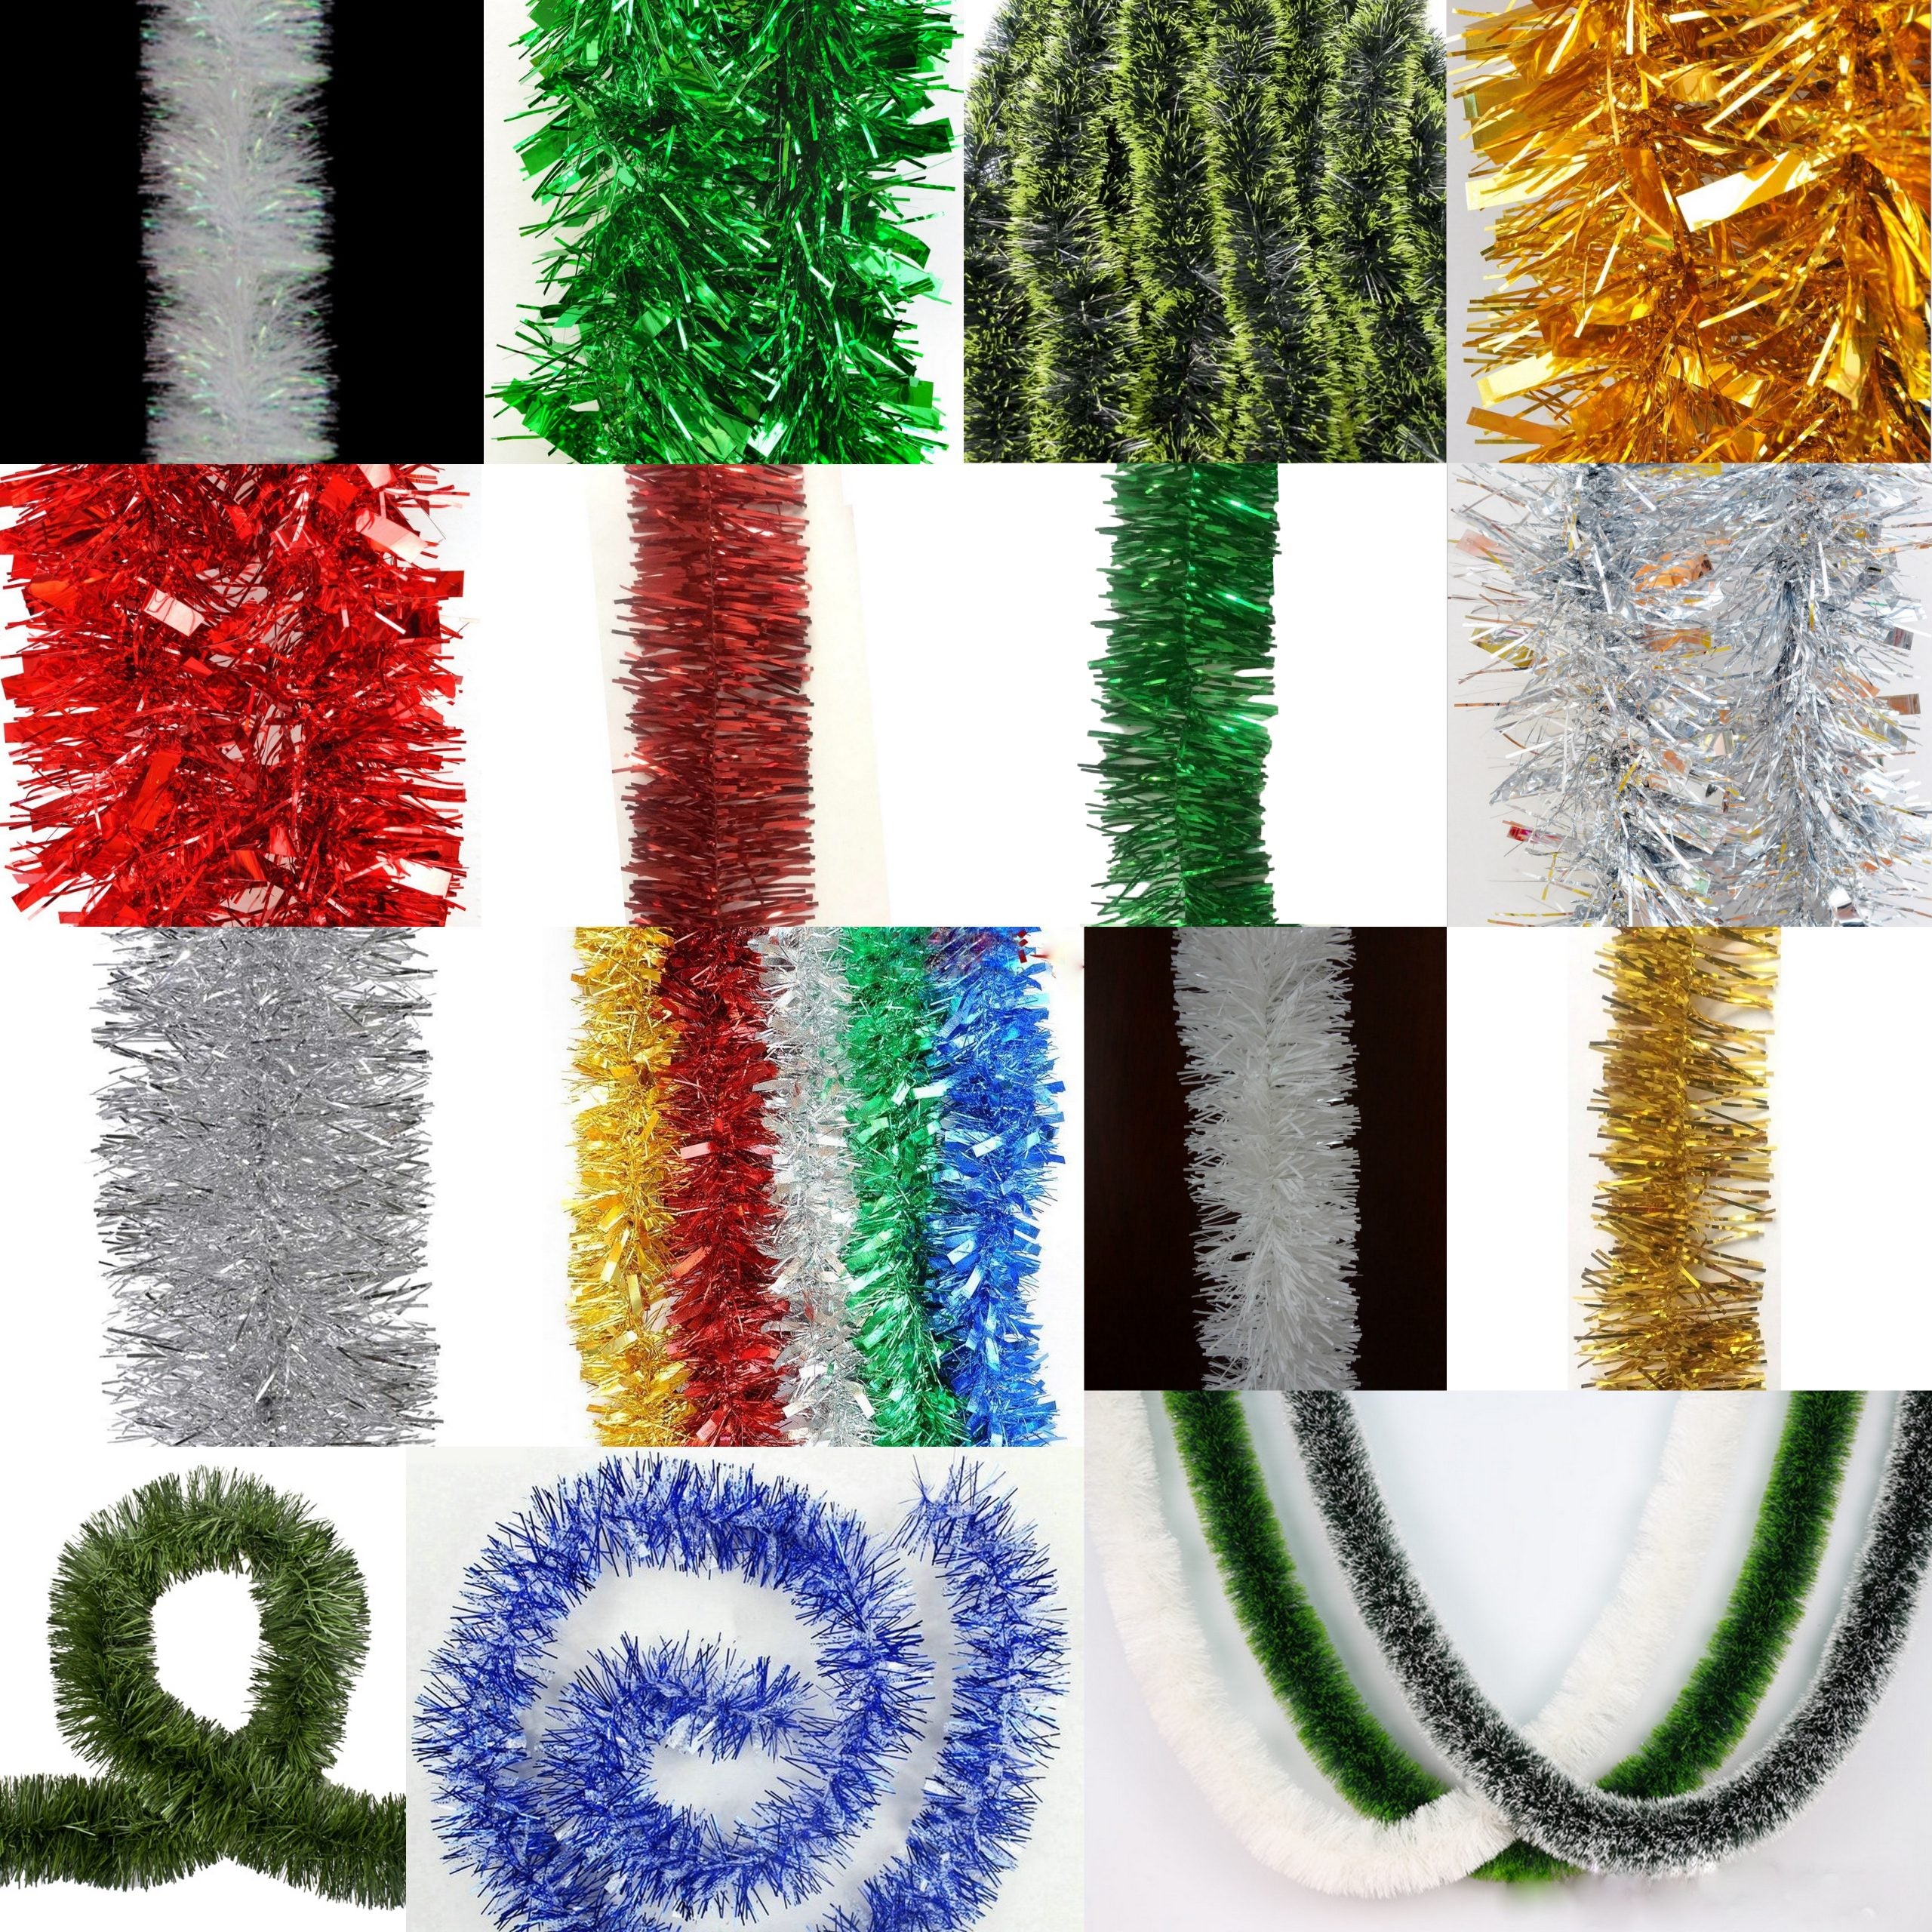 5x 2.5m Christmas Tinsel Xmas Garland Sparkly Snowflake Party Natural Home Décor, Pine Green - SILBERSHELL